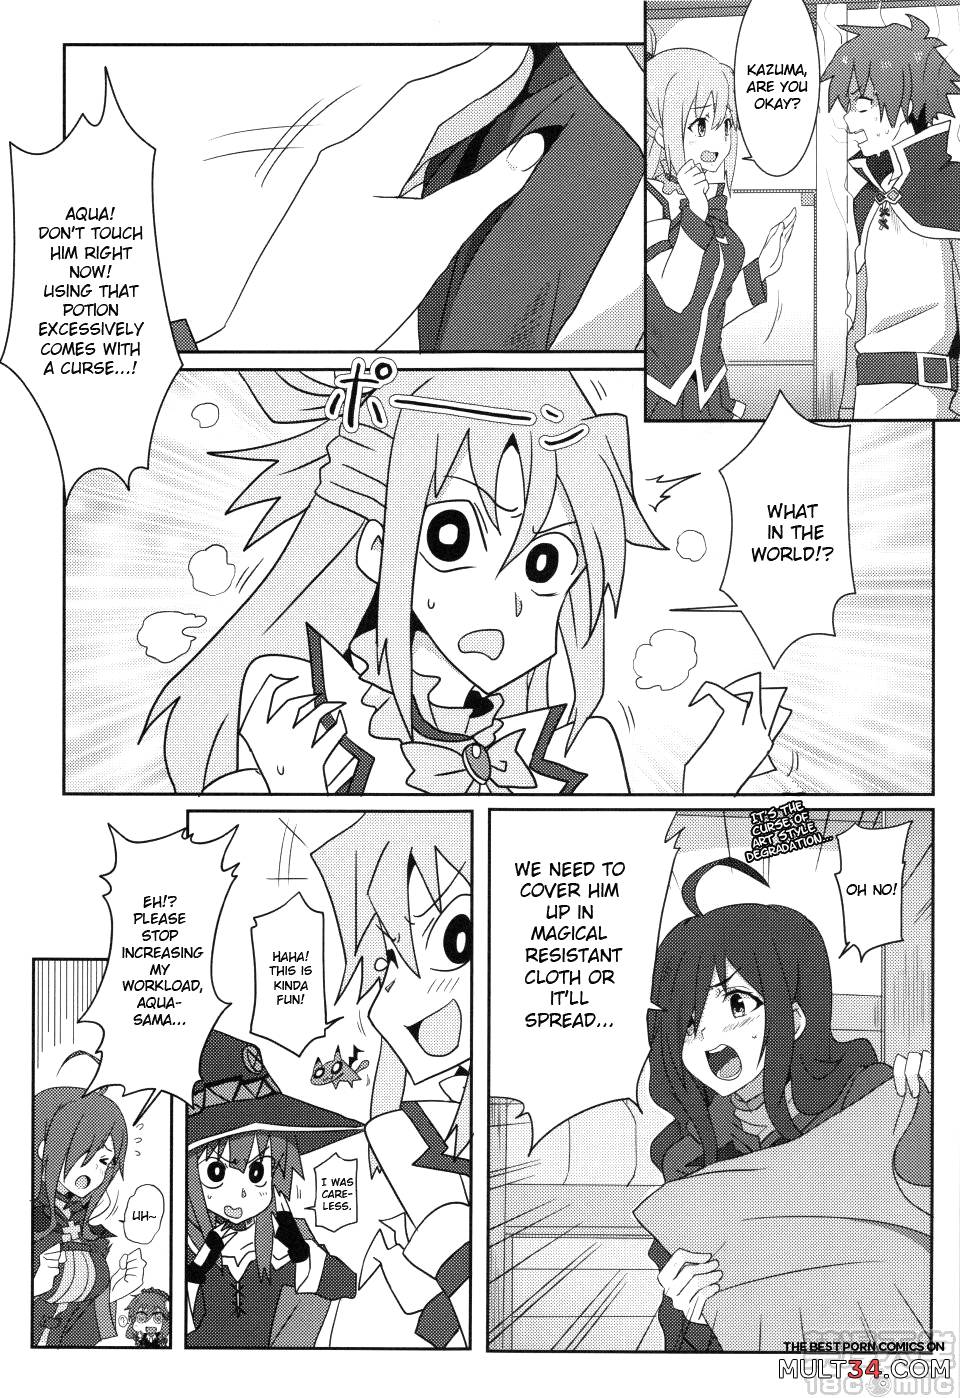 Blessing Megumin with a Magnificence Explosion! 2 page 7